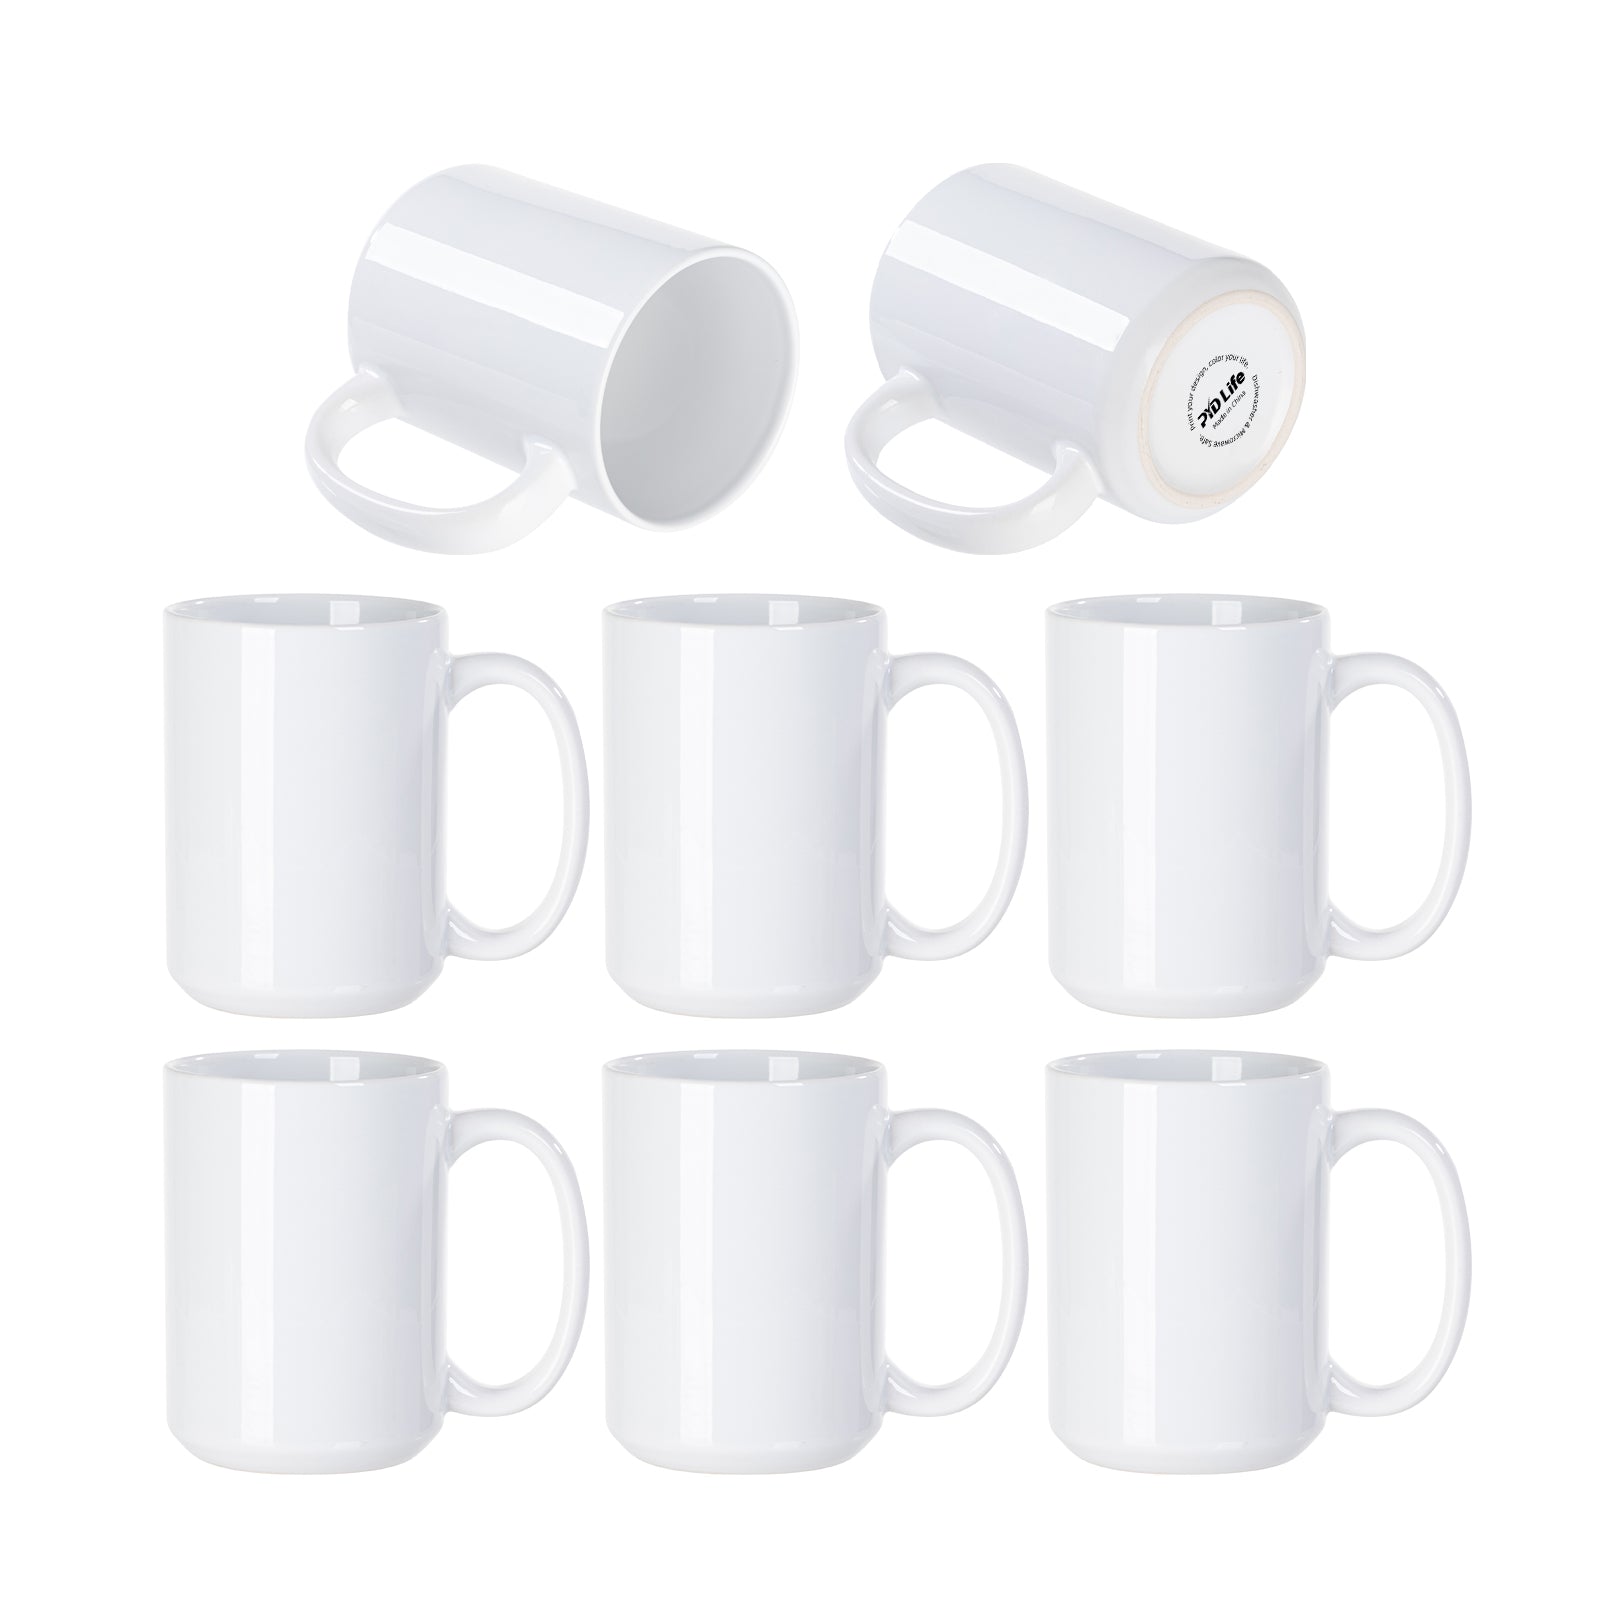 Sublimation Ceramic Coffee Mugs Black with White Patch 15 oz 8 Pack